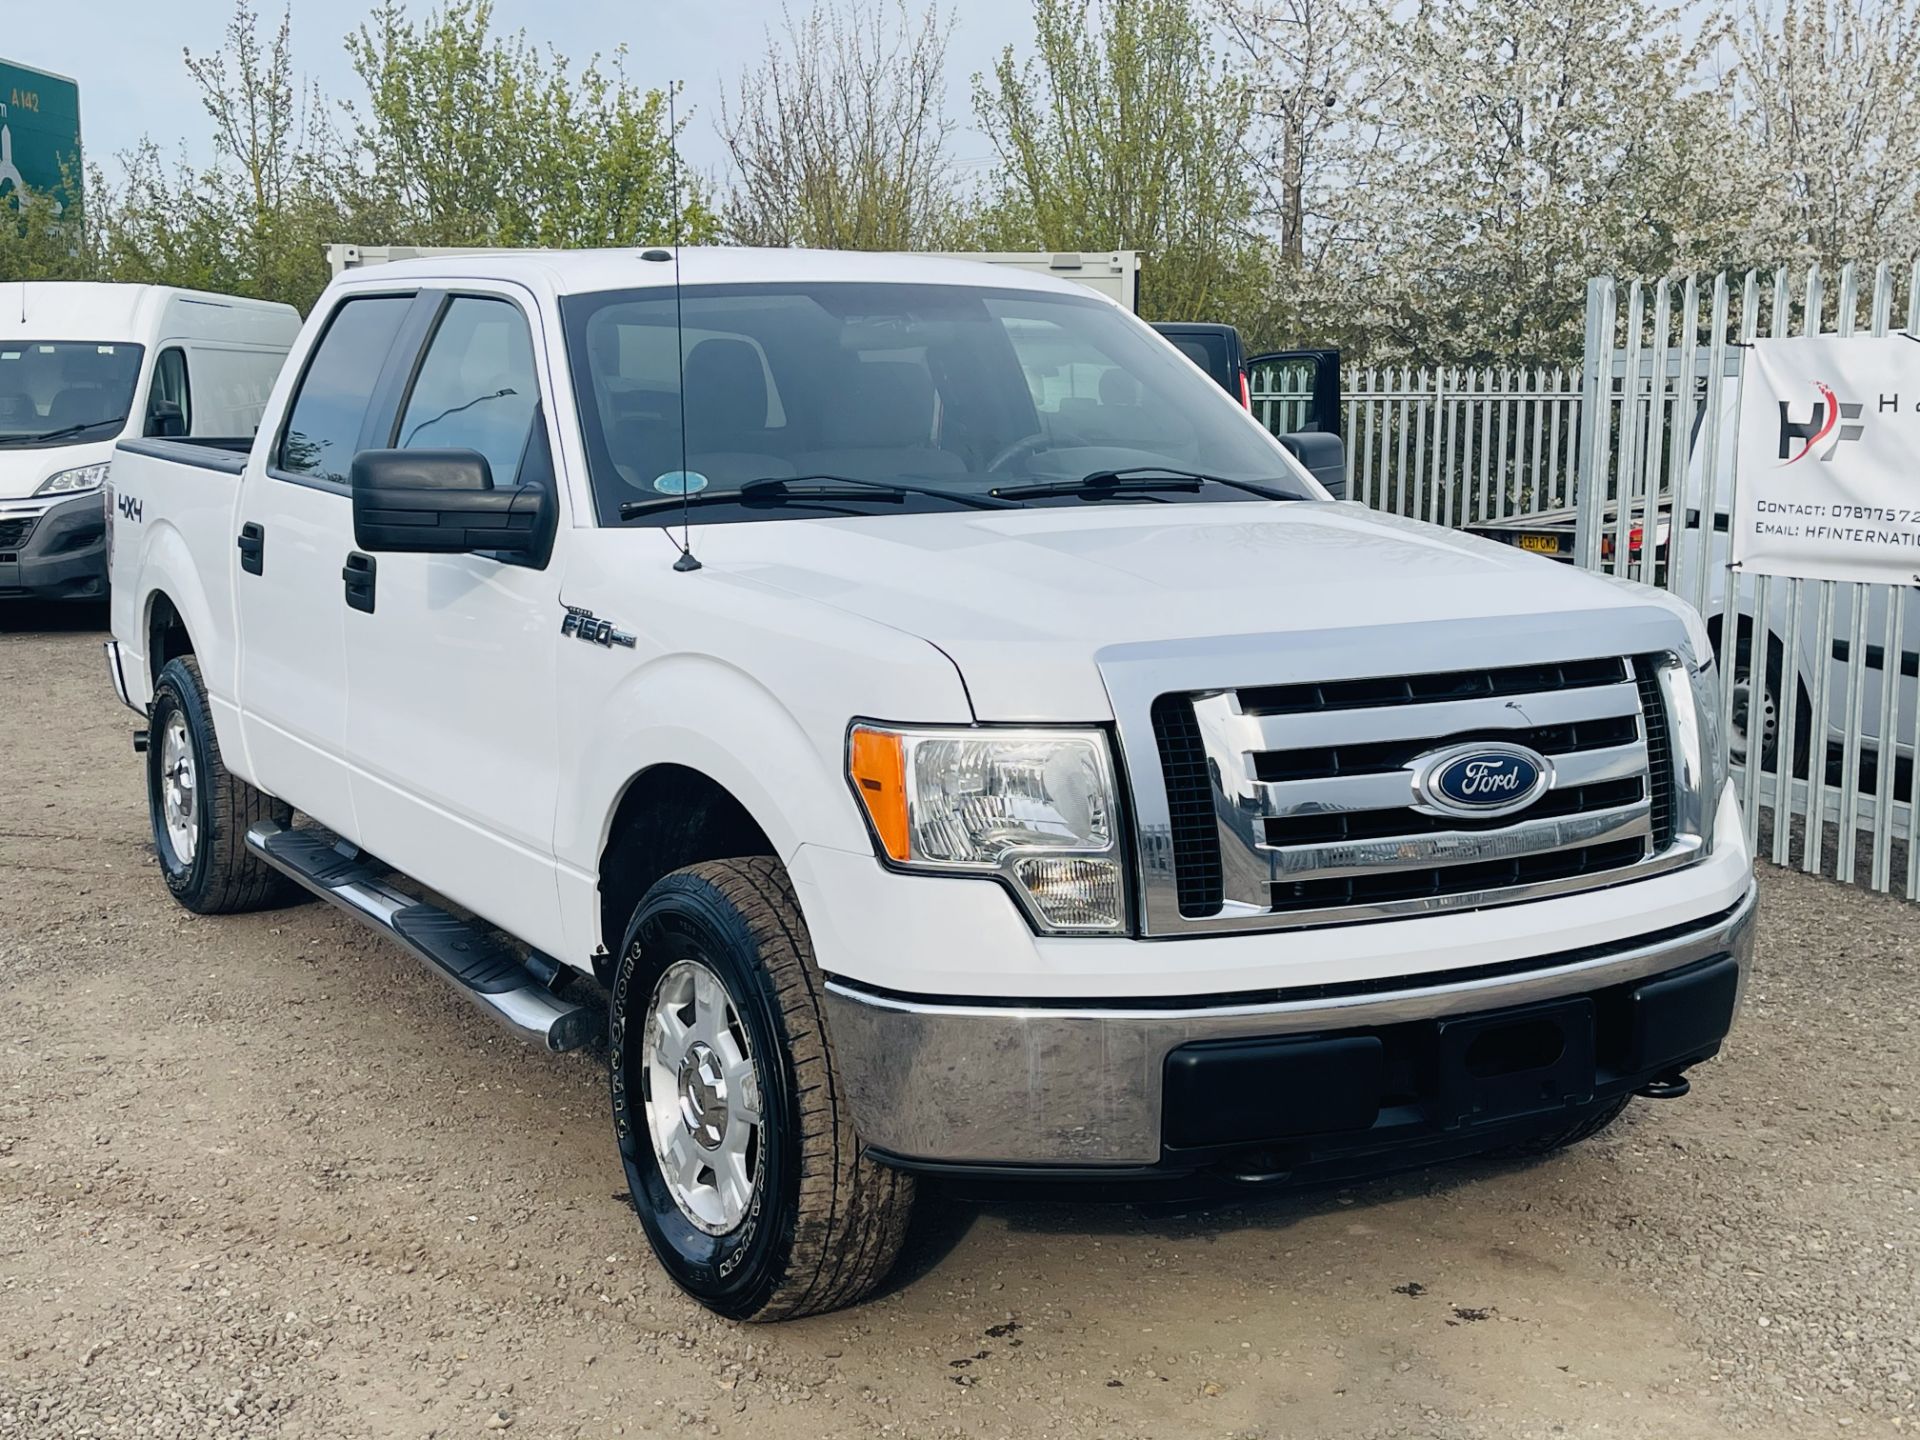 ** ON SALE ** Ford F-150 XLT 4.6L V8 Super-crew 4WD 2010 ' 2010 Year' 6 Seats - Air con - - Image 3 of 24